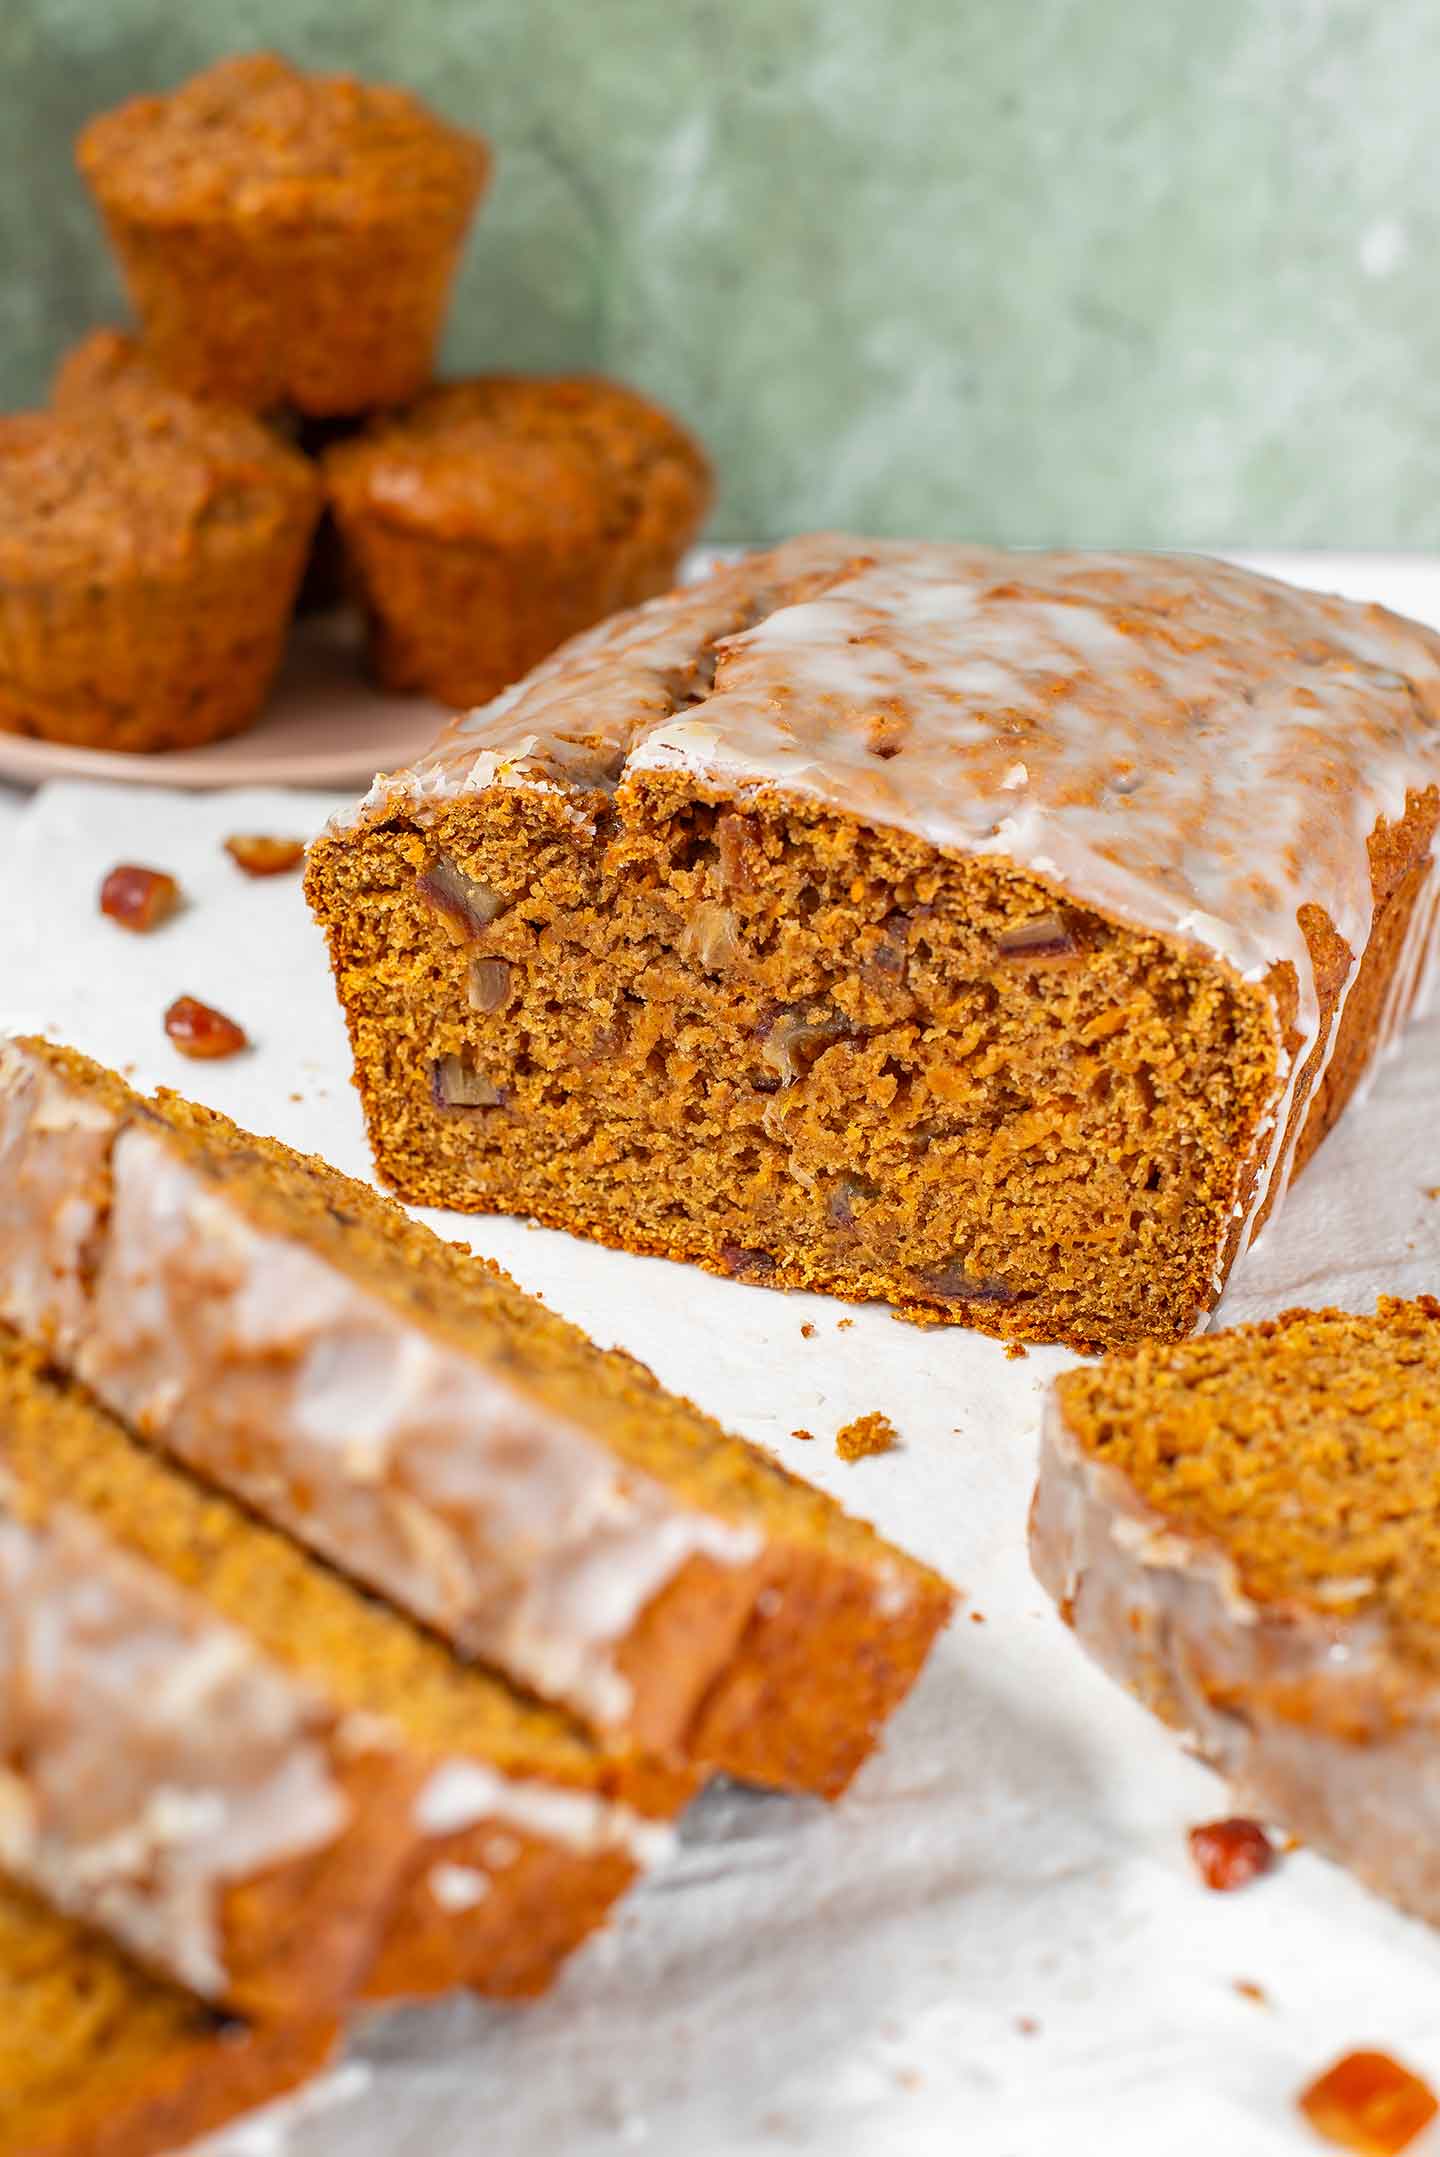 Side view of a glazed loaf of vegan sweet potato bread. The loaf has been cut exposing the tender crumb speckled with chopped dates. Muffins are stacked on a plate in the background.